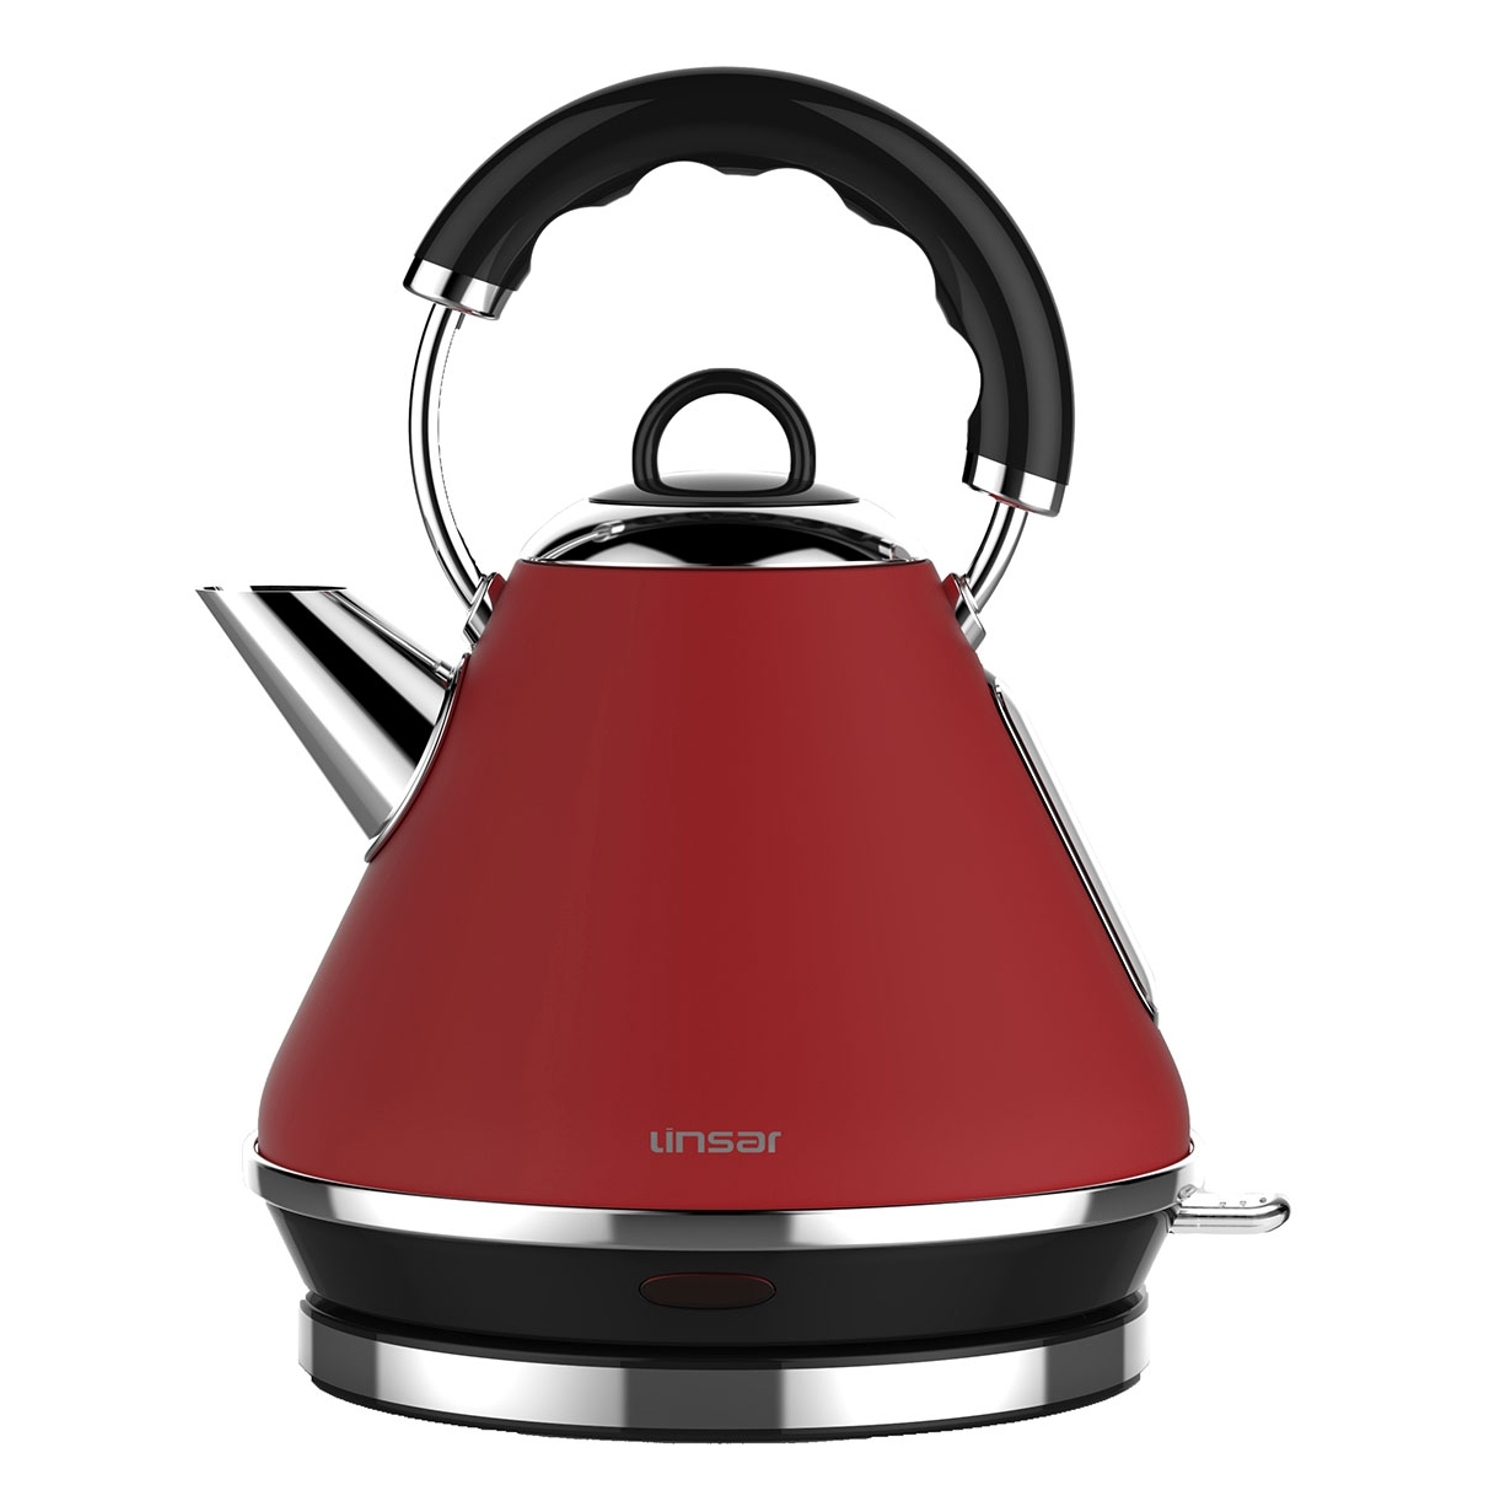 Linsar 1.7 Litre Pyramid Kettle - Red - 0